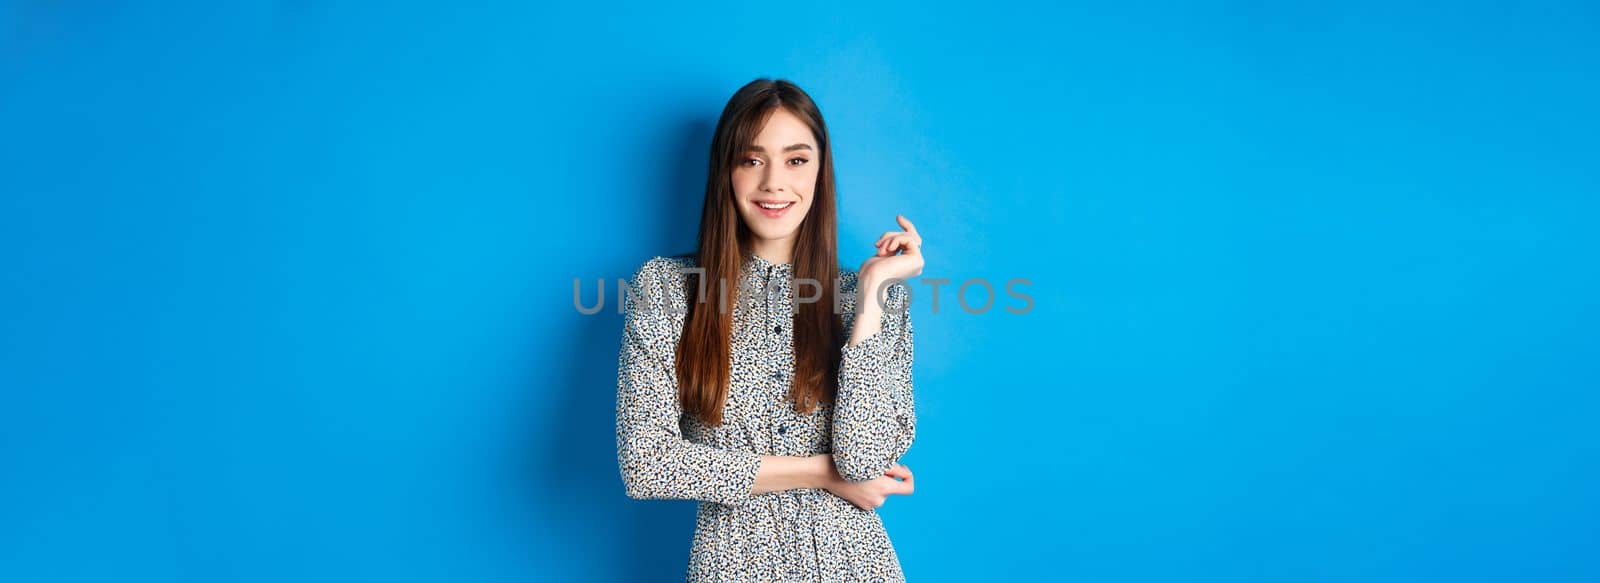 Beautiful caucasian woman 25s wearing dress, standing against blue background and smiling confident.